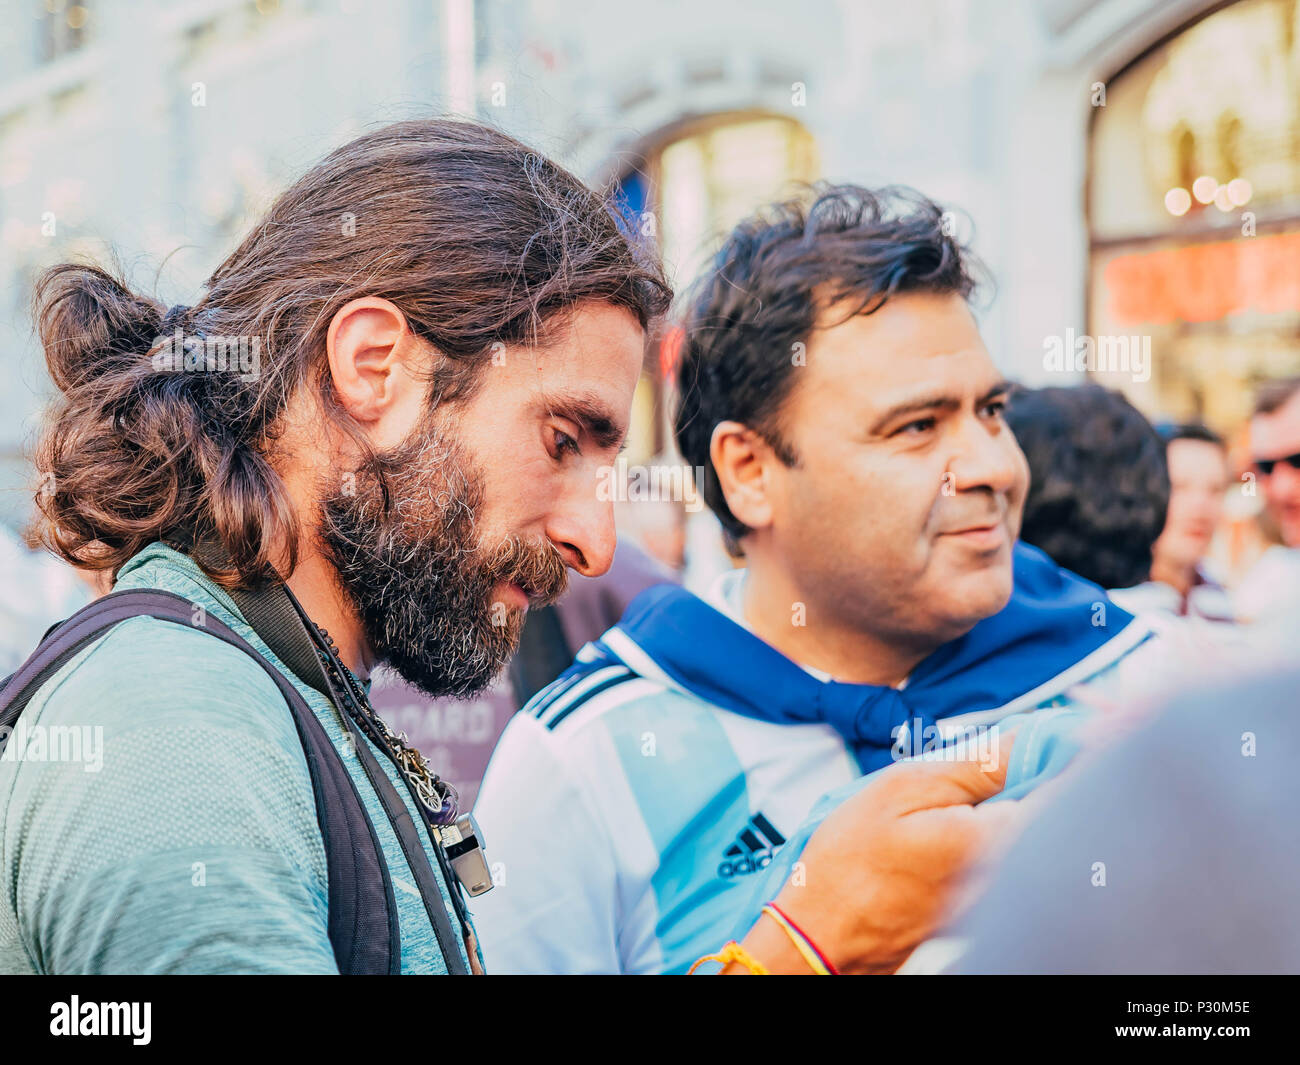 Traveler around the world Matthias Amaya arrived in Moscow during the football championship to support the national team of Argentina. Stock Photo